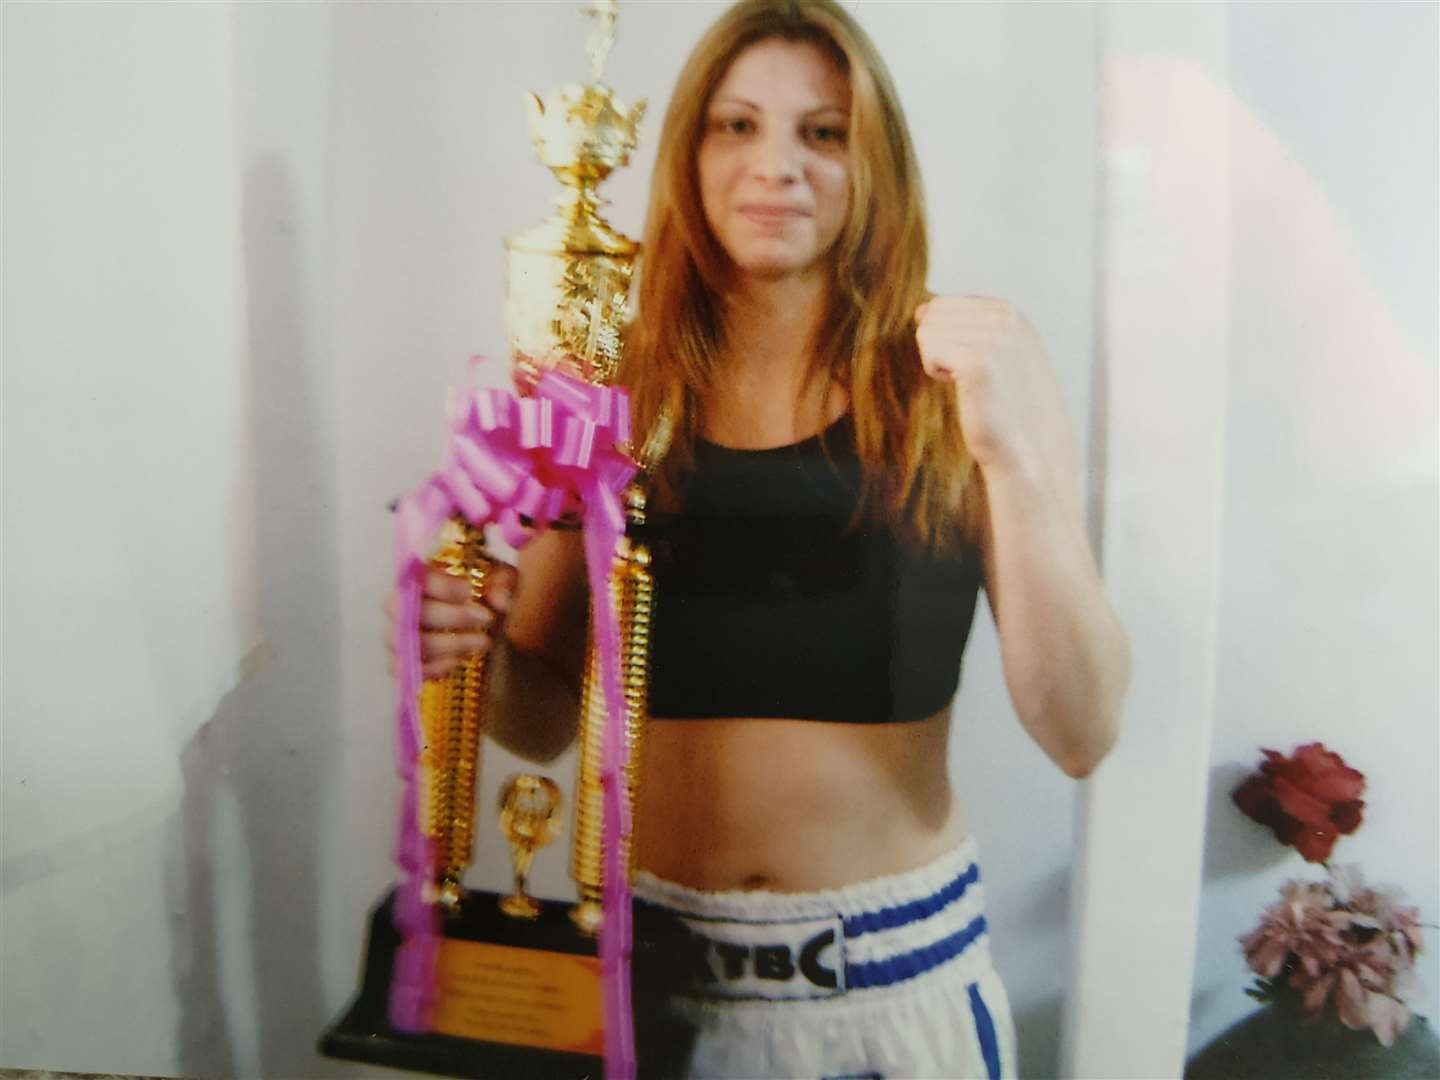 Nicola holding her trophy after fighting an inmate in Bangkok, Thailand. Picture: Nicola Ireland